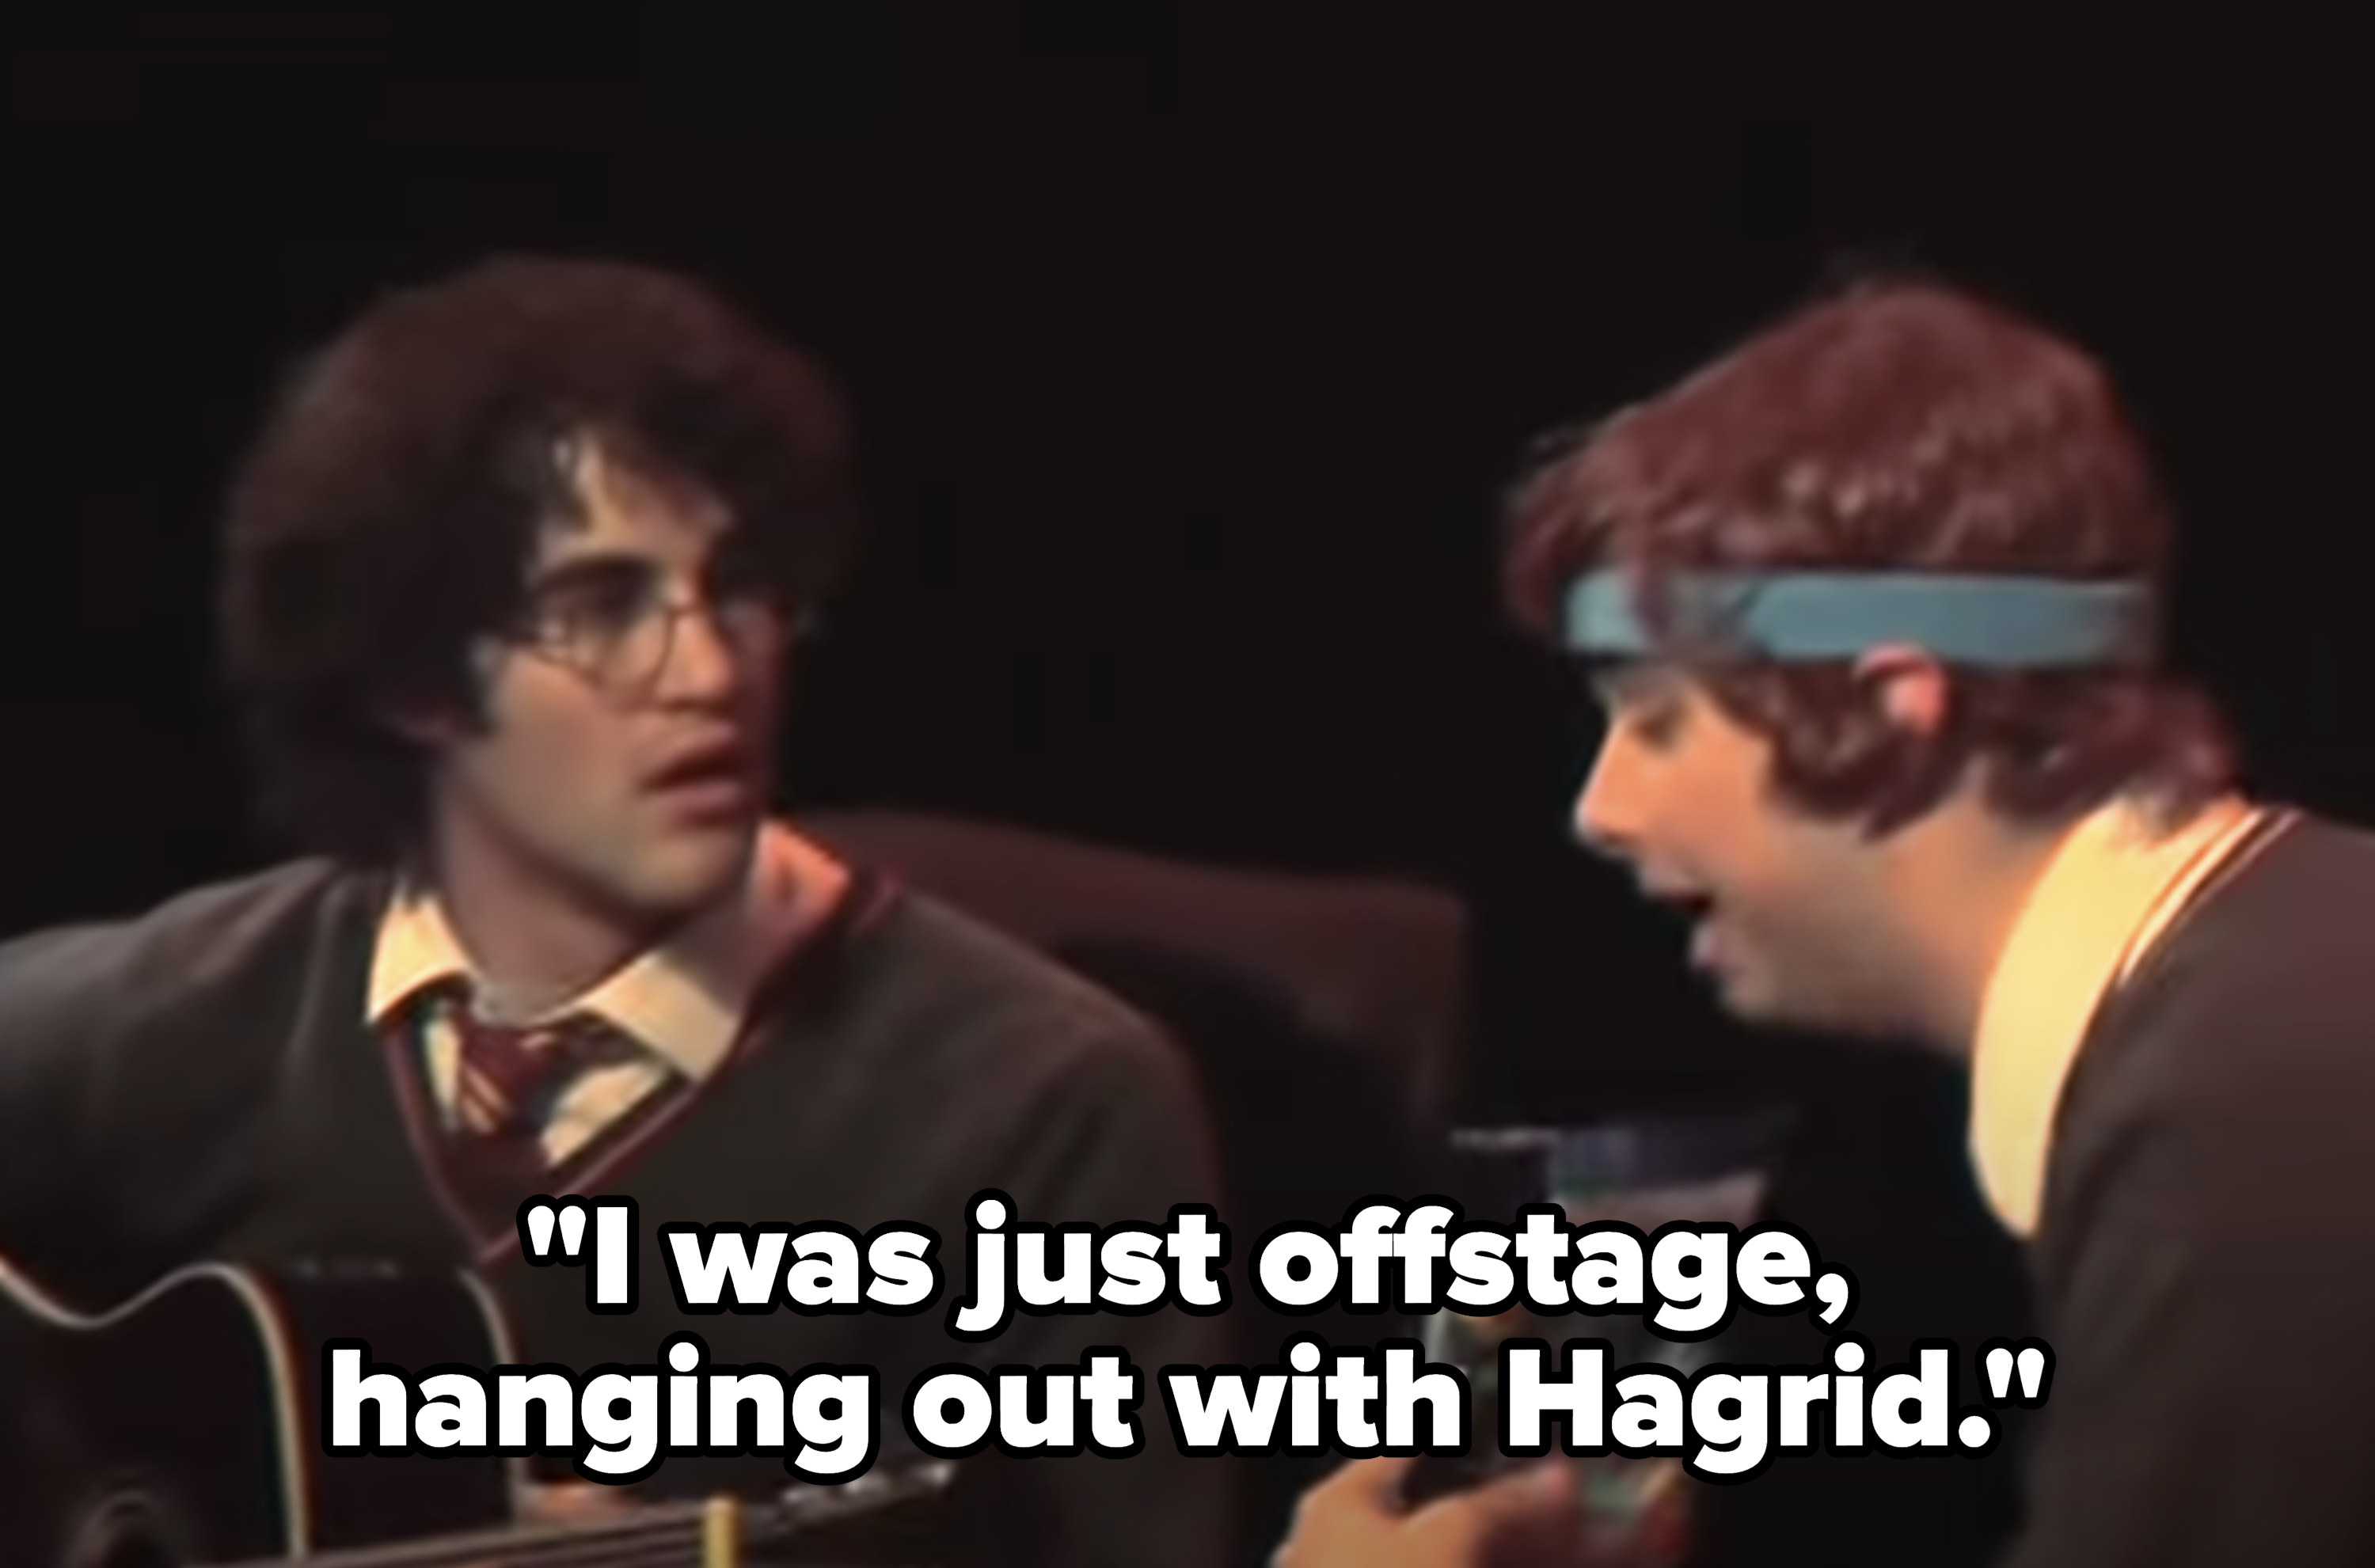 Ron says he was backstage hanging with Hagrid